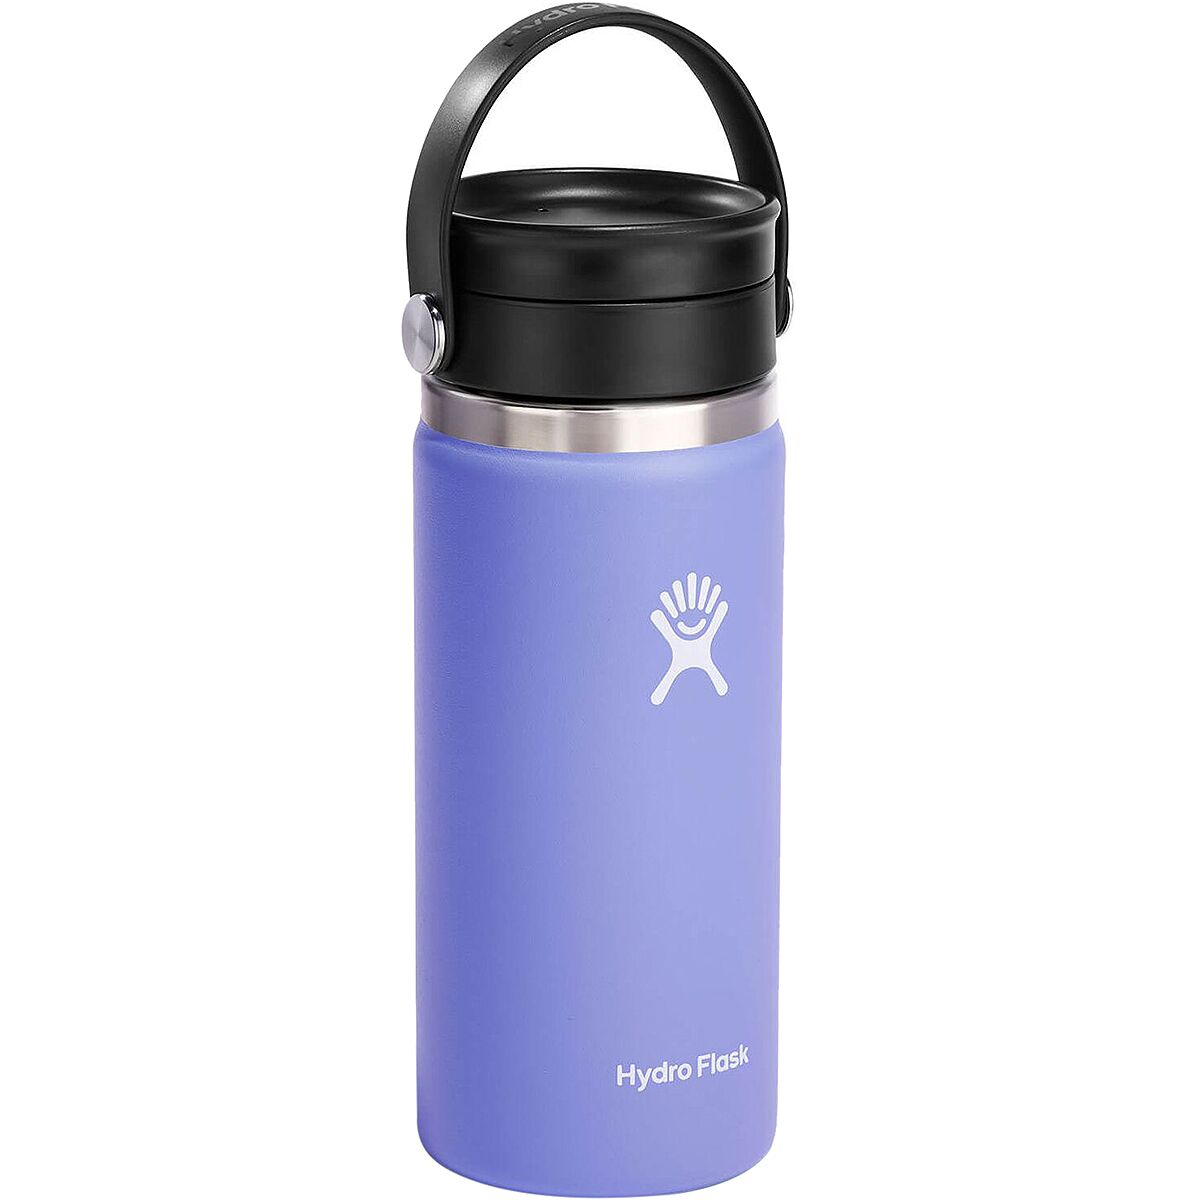  Hydro Flask Steel 12 oz. Mug with Insulated Press-In Lid : Home  & Kitchen